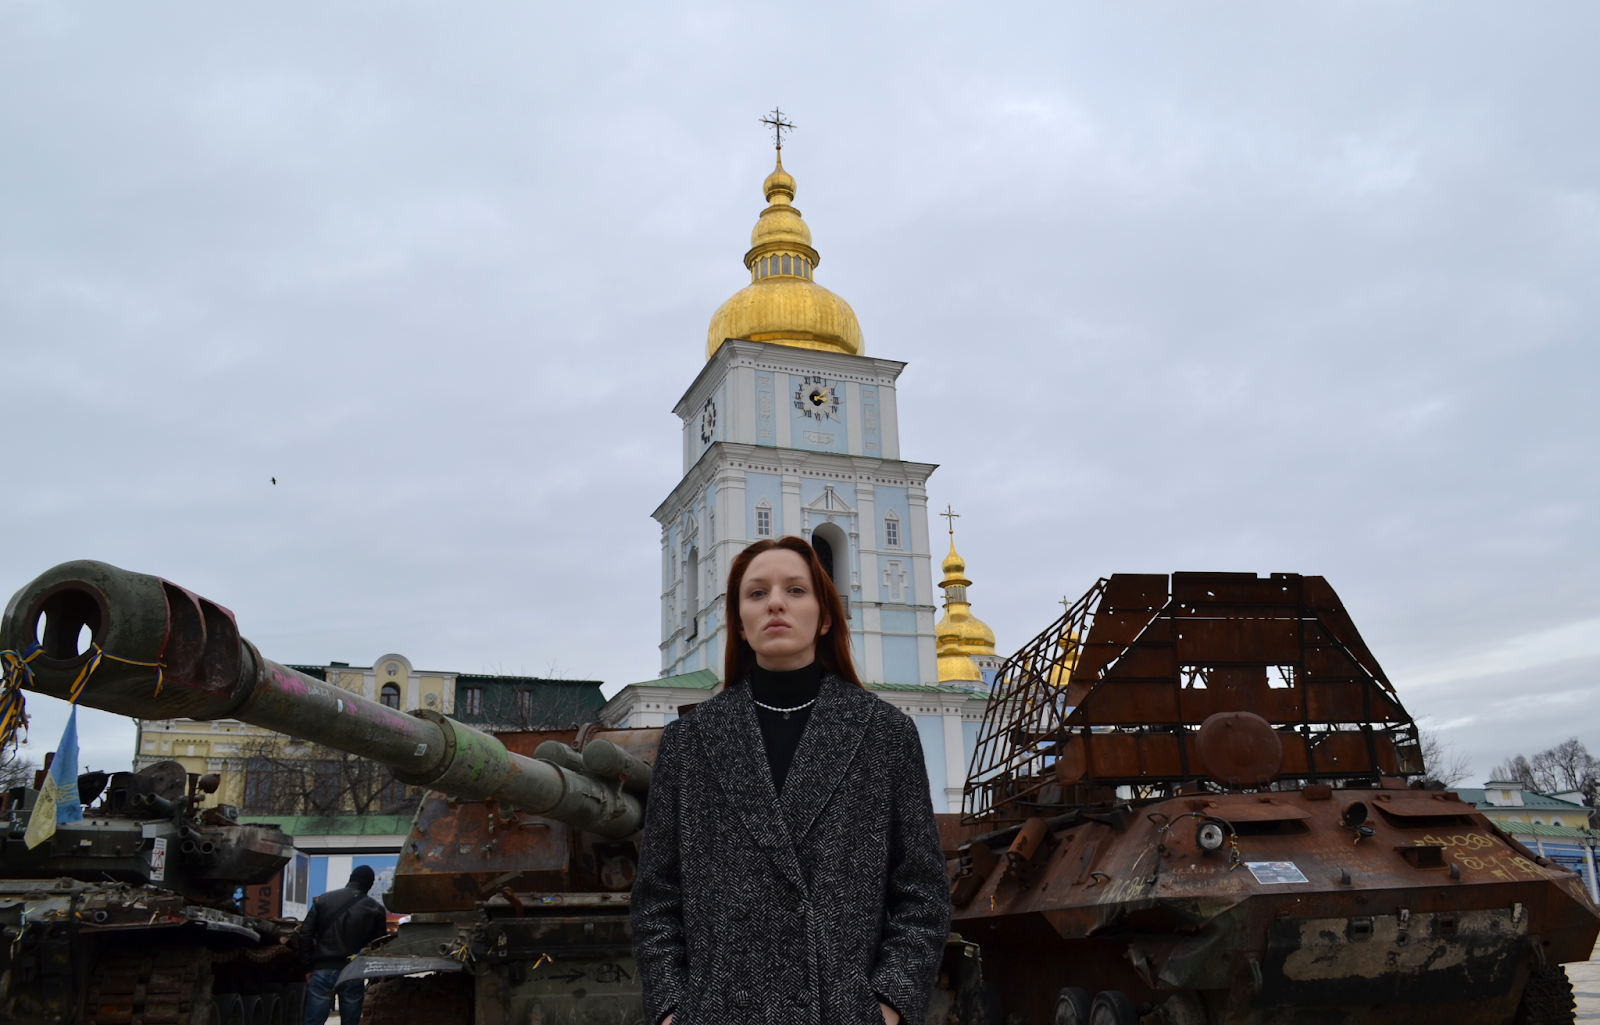 Interview with Viktoriia Klymenko, our Ukraine-based content creator, on her life in Kyiv during the war